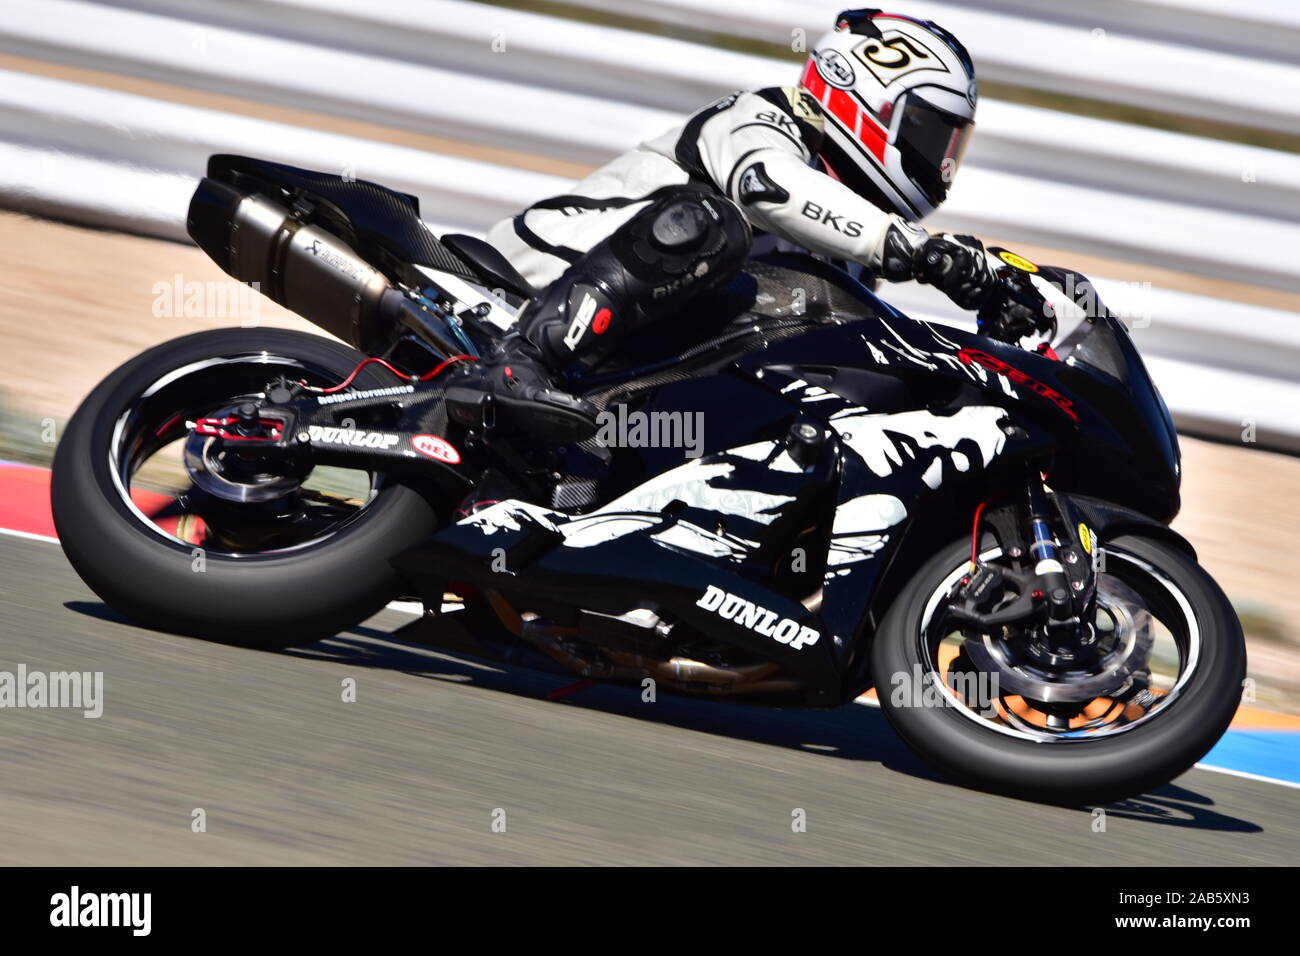 HONDA CBR600RR MOTORCYCLE AND DOING TRACKDAYS Stock Photo